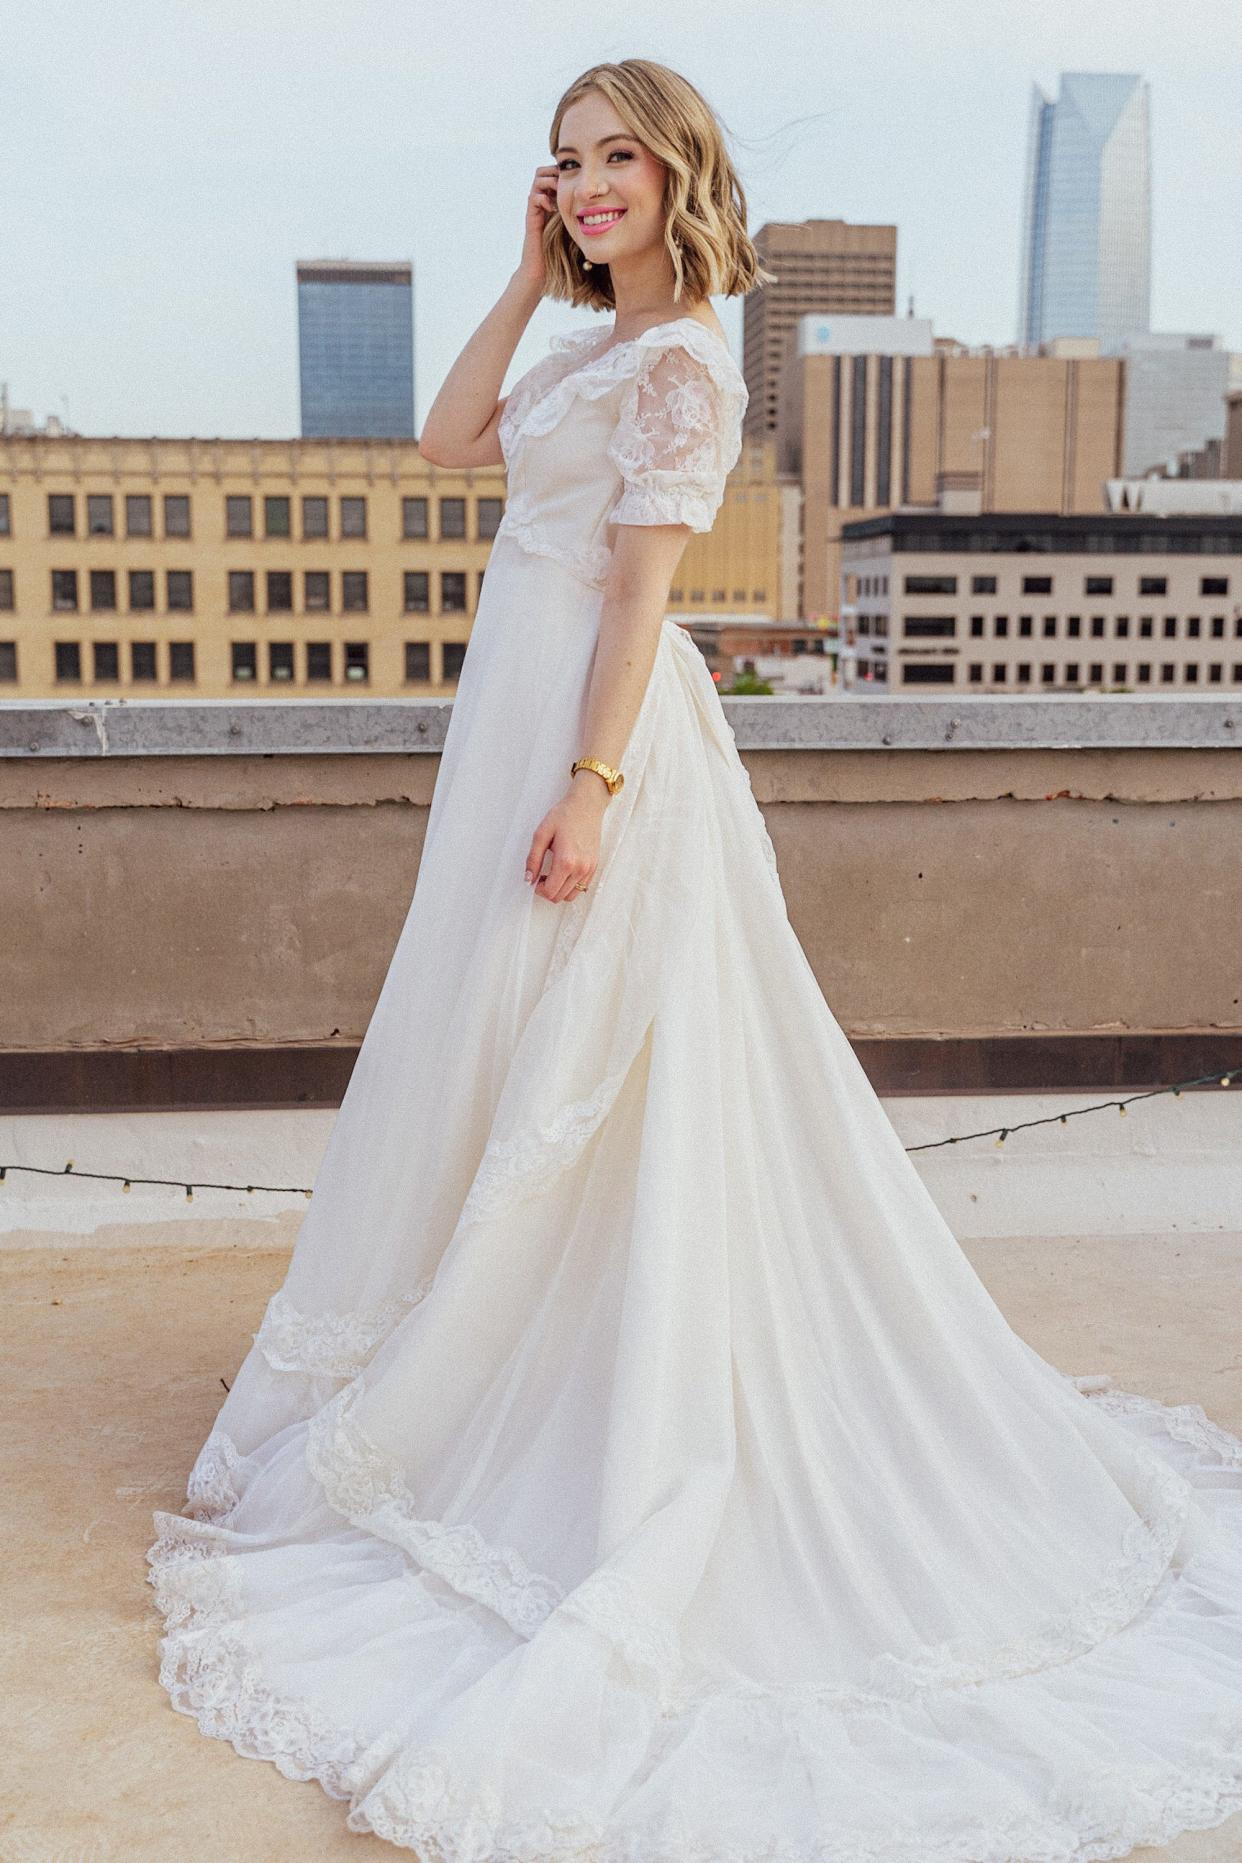 A bride smiles in her wedding dress on top of a roof.